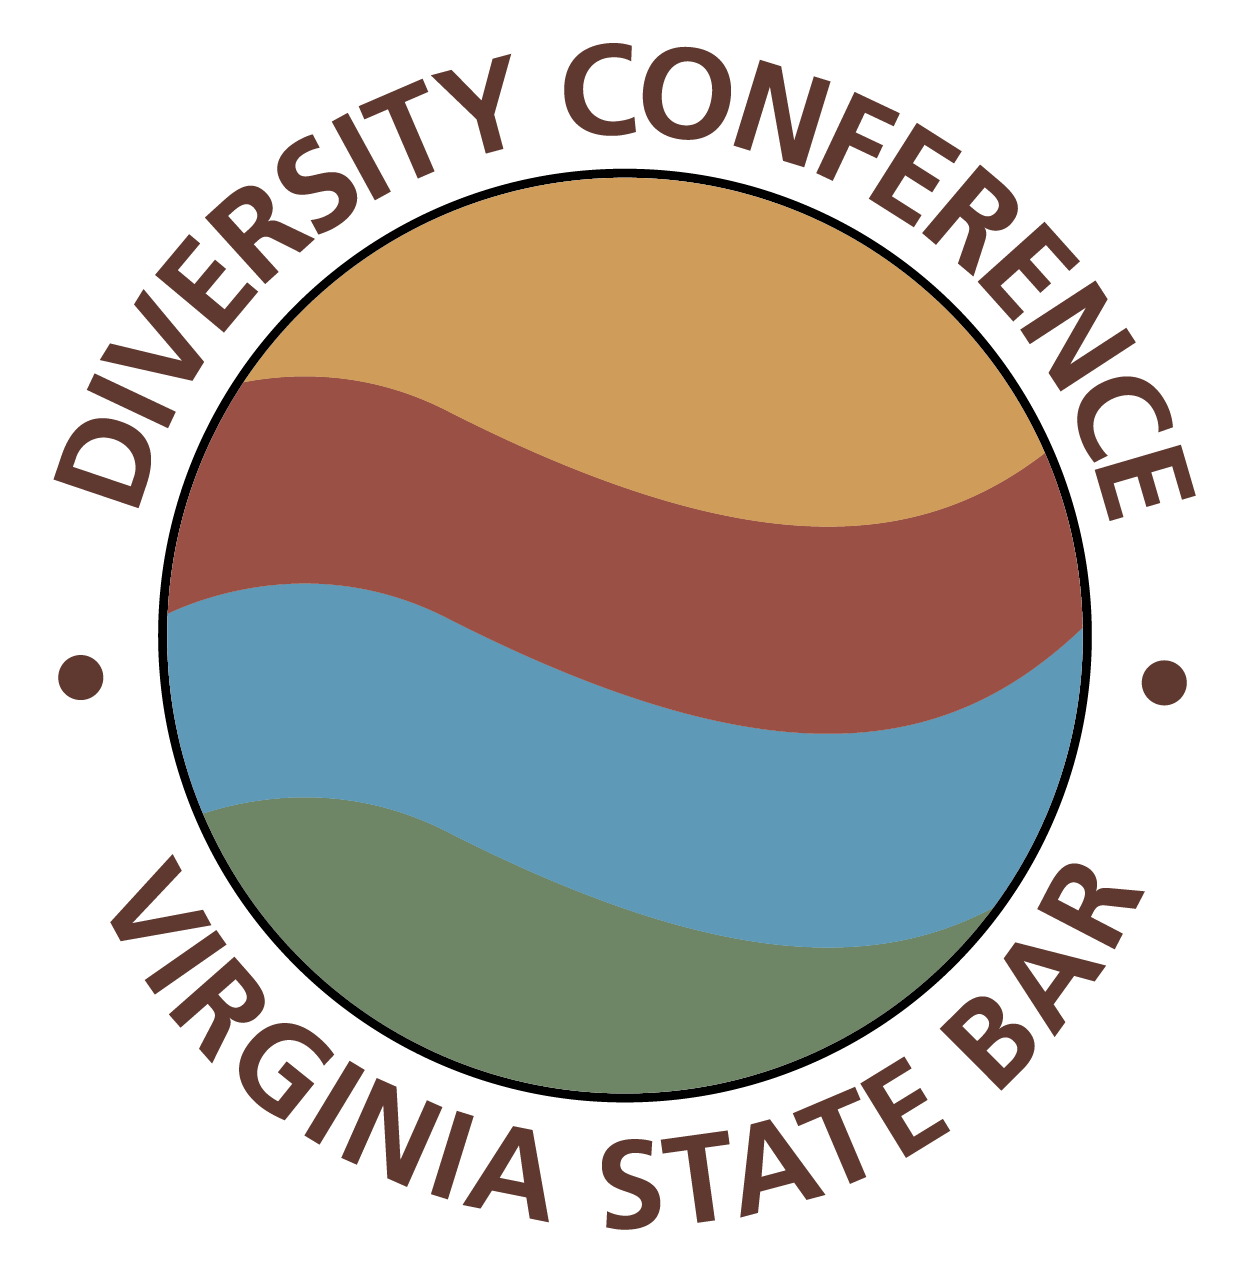 Diversity Conference of the Virginia State Bar Logo